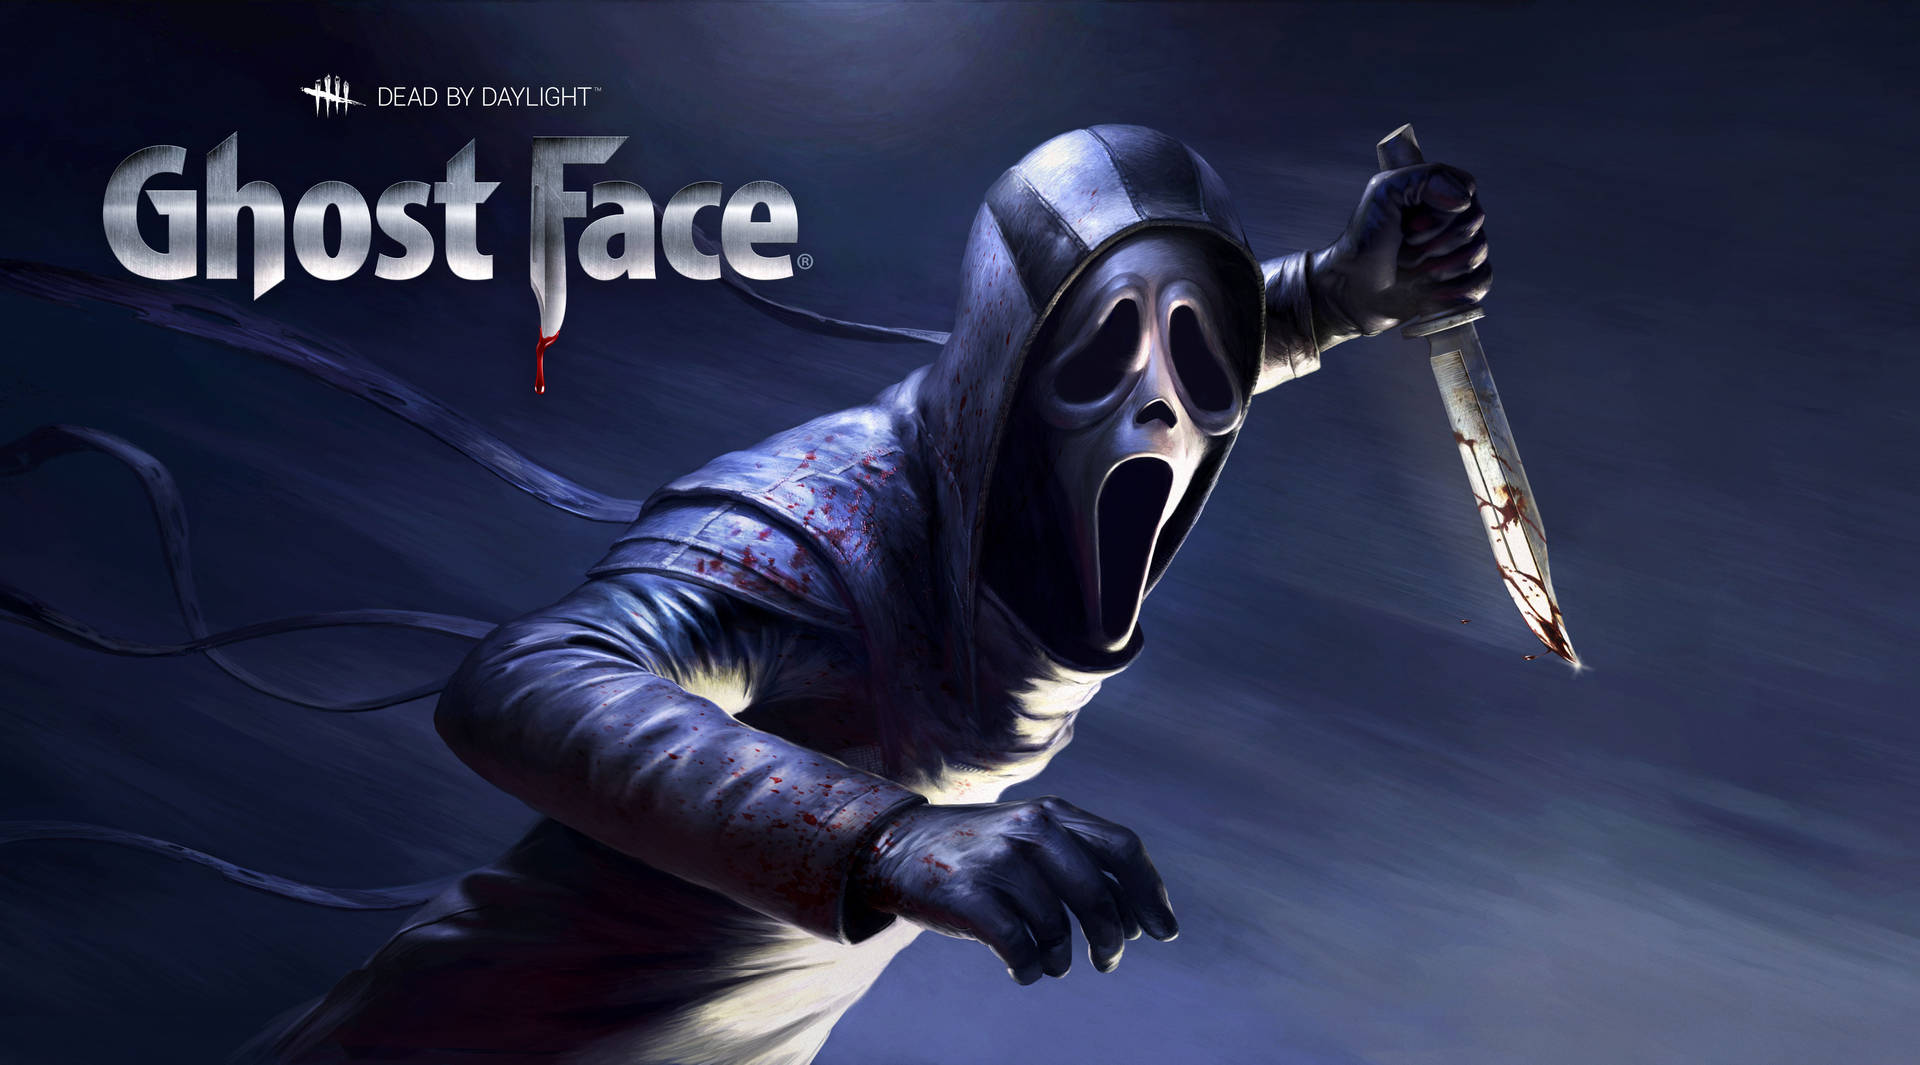 Play as Ghost Face and take on the Survivor in Dead By Daylight. Wallpaper